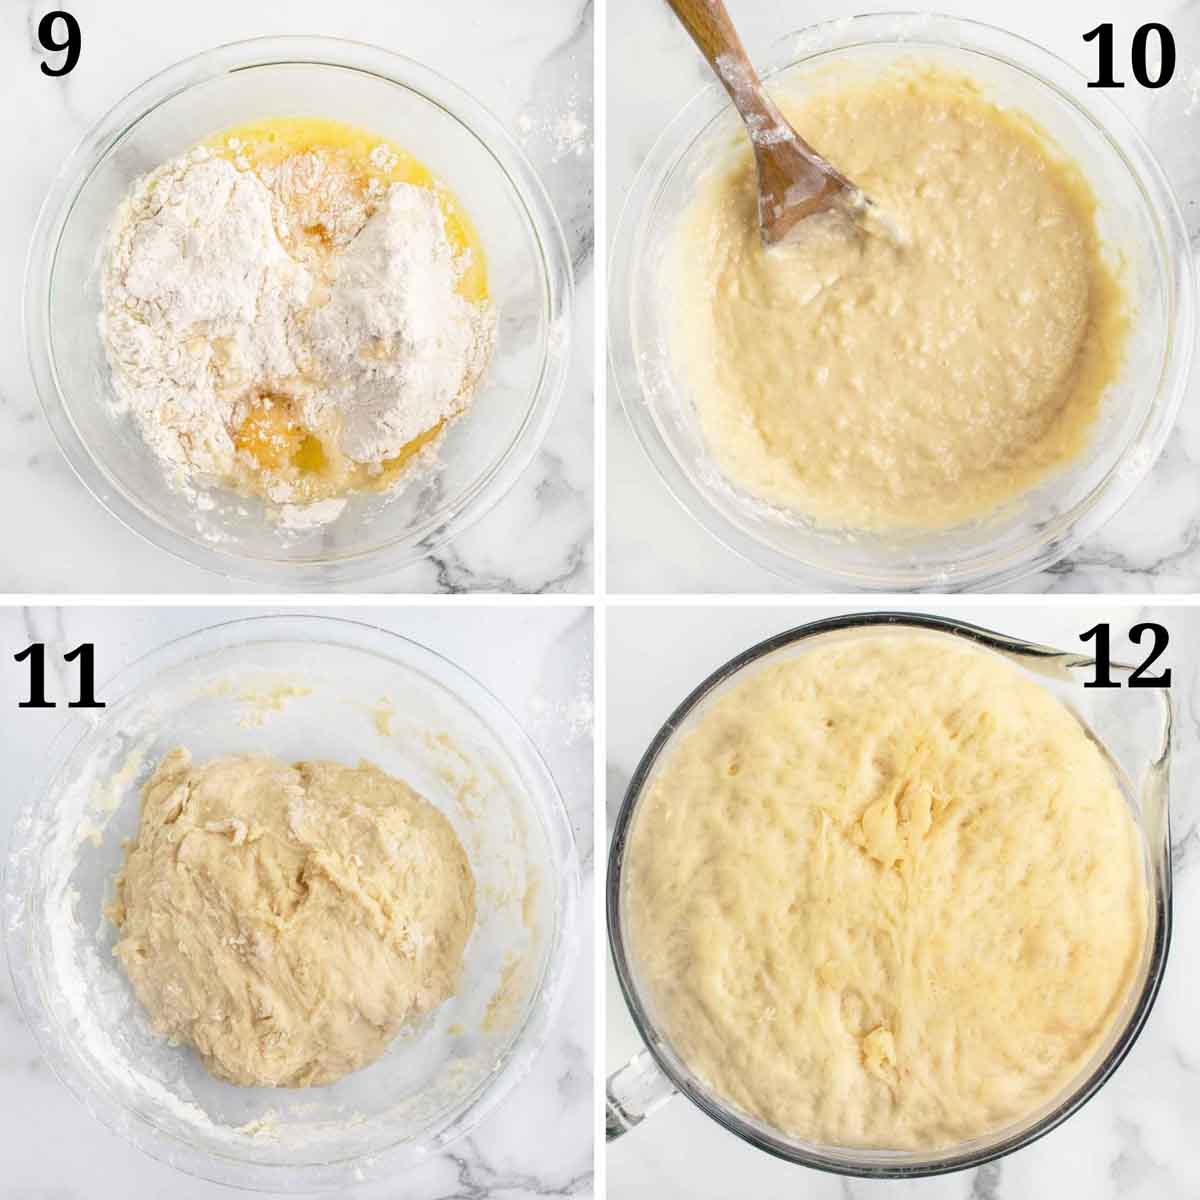 four images showing the next steps in making the dough